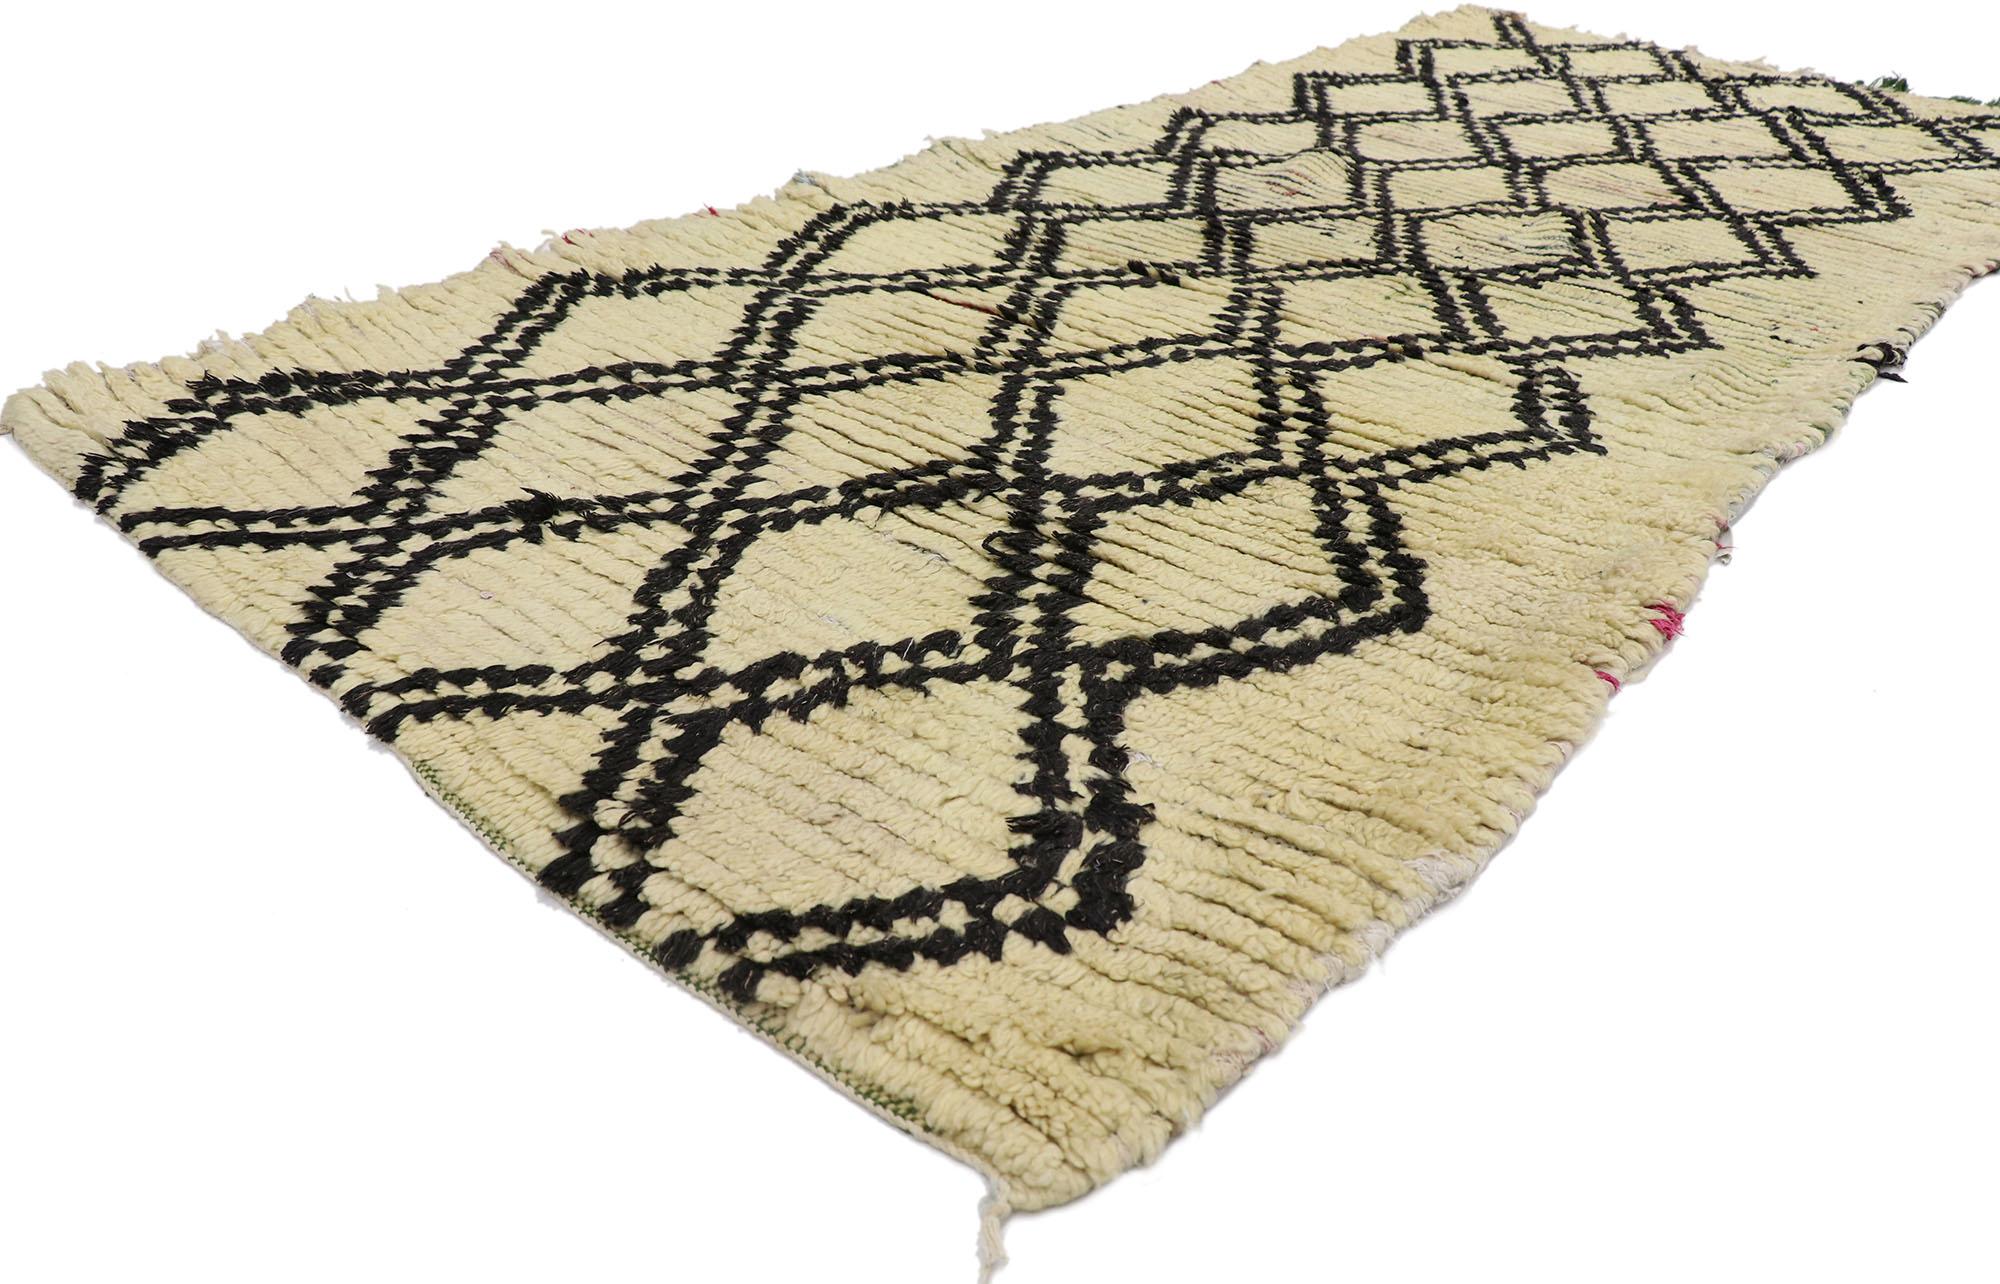 21579 Vintage Berber Moroccan Azilal Rug with Tribal Style 03'10 x 07'11. With its simplicity, plush pile and tribal style, this hand knotted wool vintage Berber Moroccan Azilal rug is a captivating vision of woven beauty. It features a lozenge